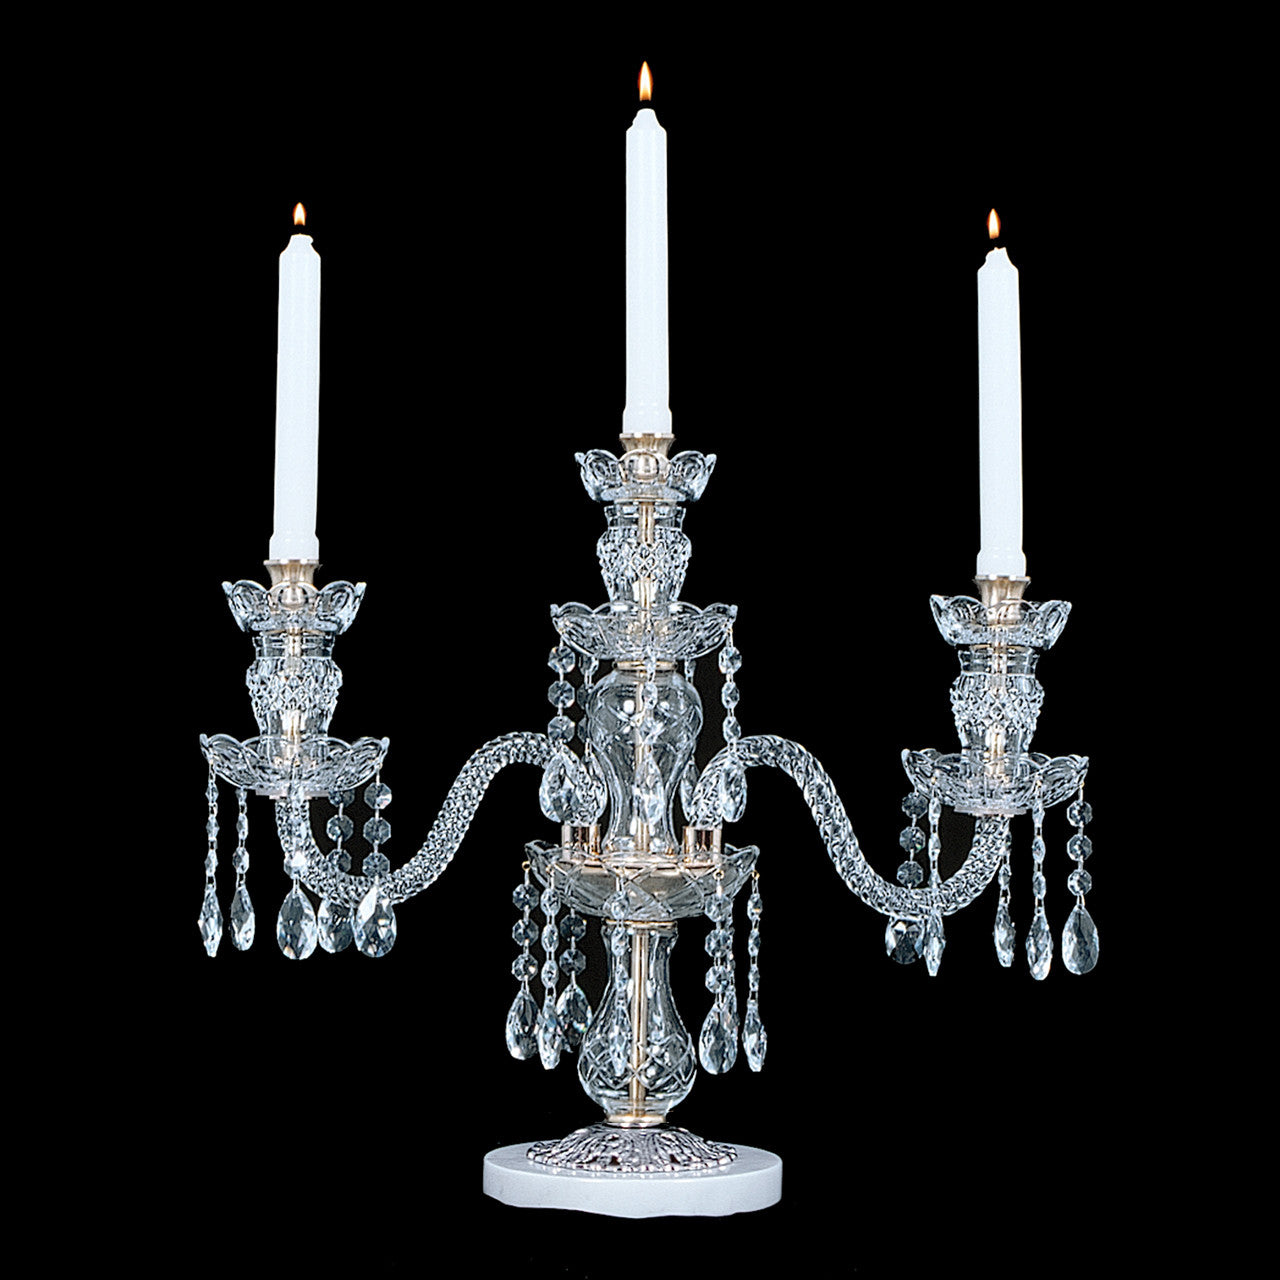 Hot! 5 Arms Crystal Candelabra with Hanging Crystals for Wedding